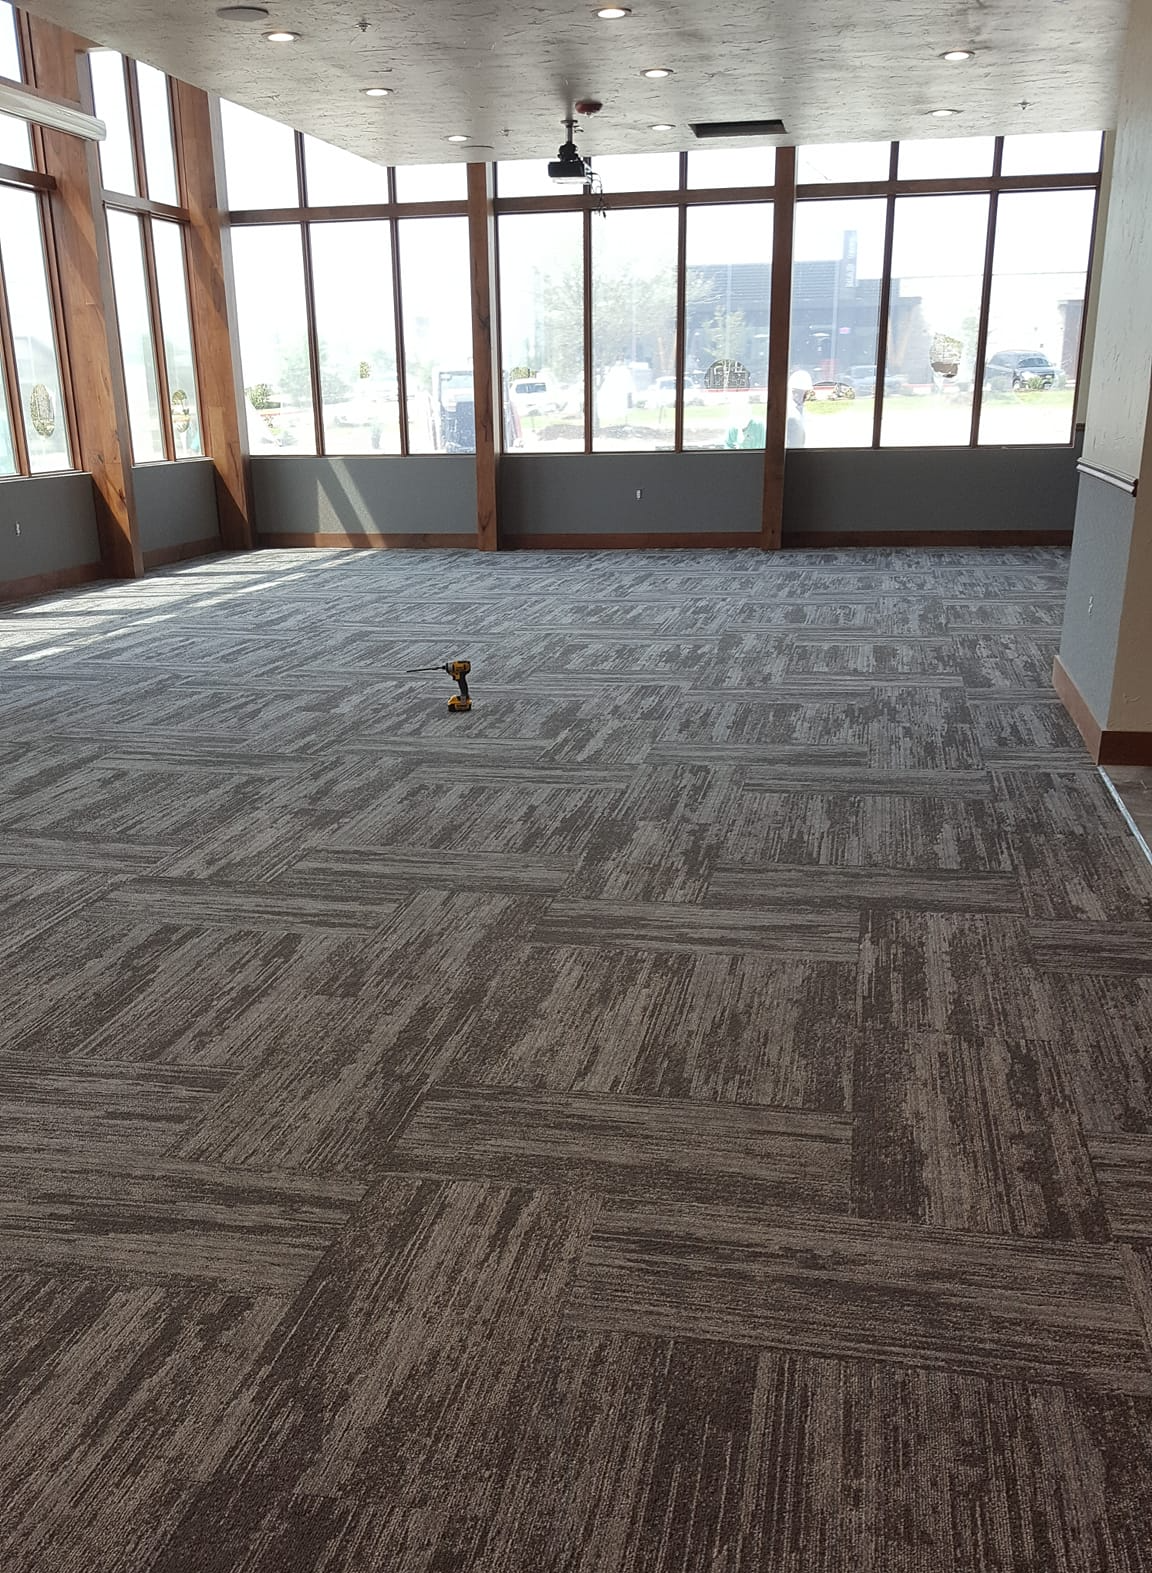 This conference room with it's big windows looks great with this finished carpet installation.